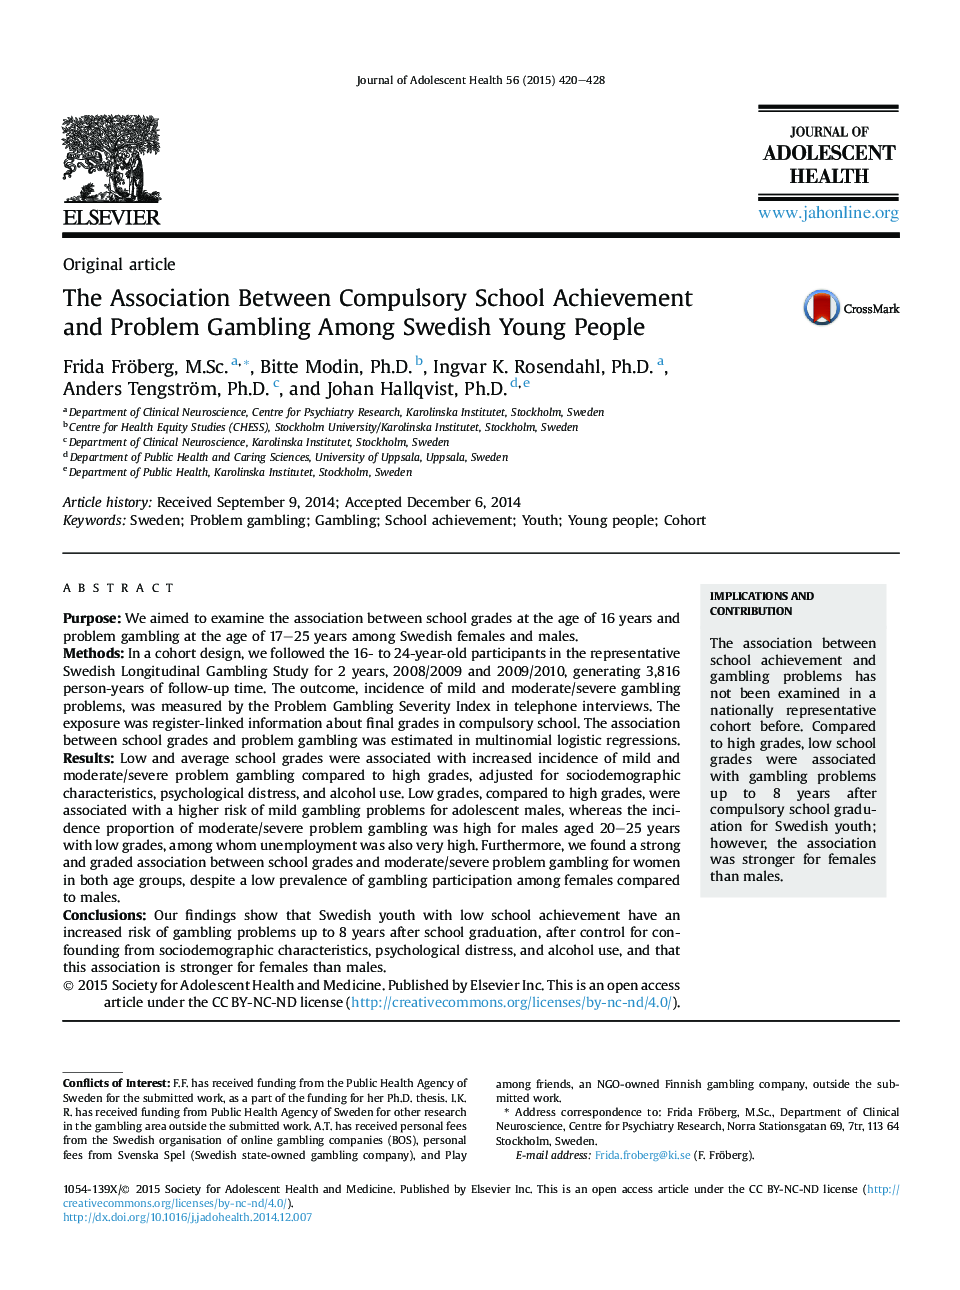 The Association Between Compulsory School Achievement and Problem Gambling Among Swedish Young People